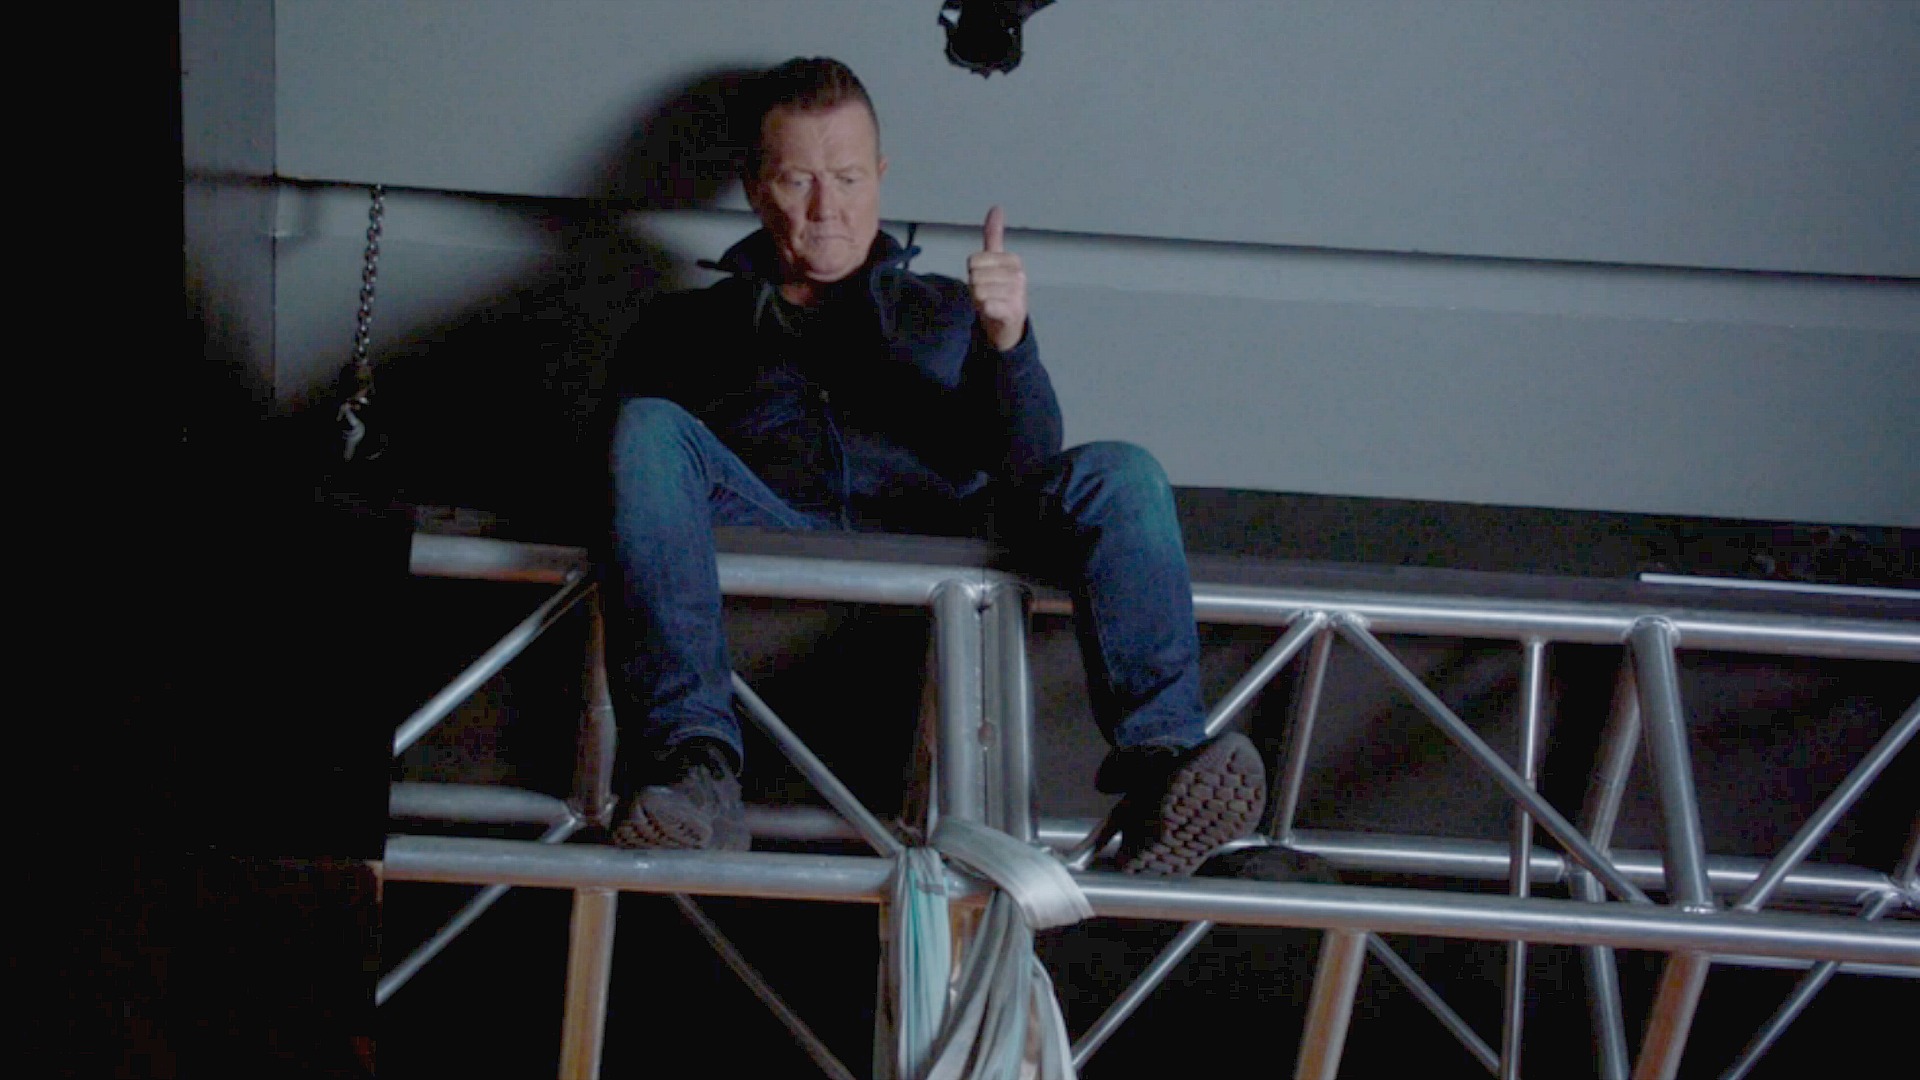 Agent Cabe Gallo is a man you can truss.